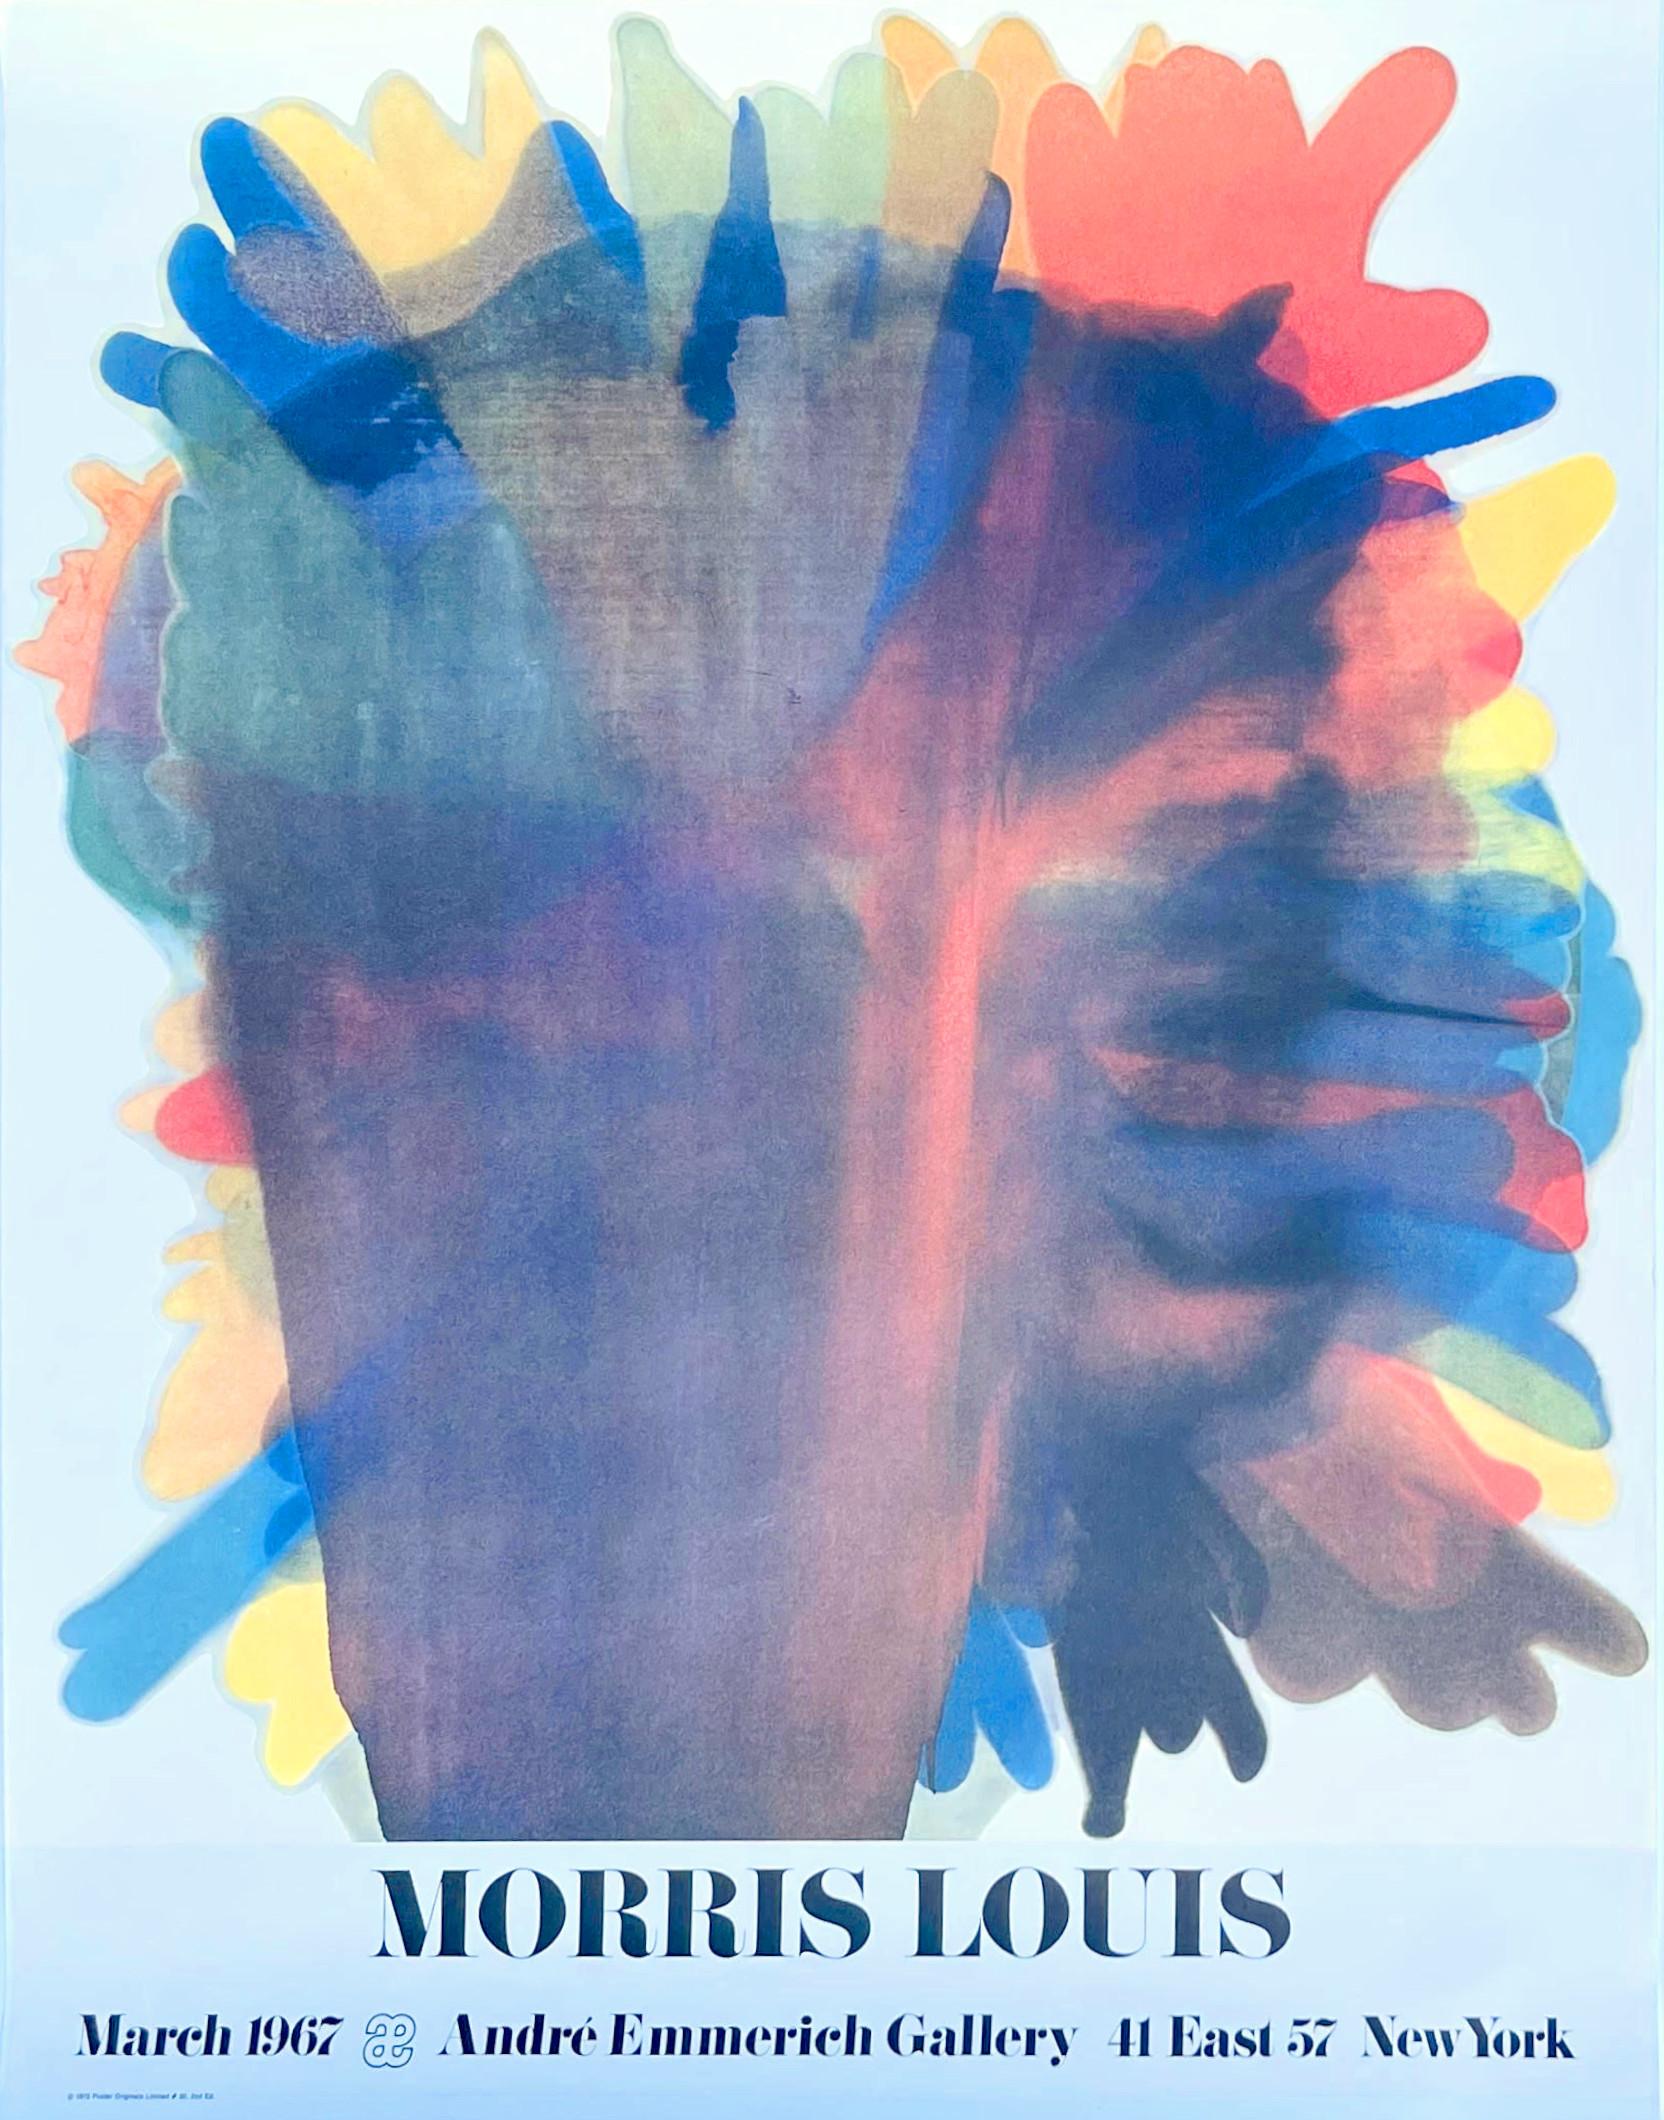 Morris Louis
Poster for Morris Louis at Andre Emmerich Gallery, 1967, 1975
Offset lithograph poster
Bears copyright stamp and date (1975) from Poster Originals, not signed
28 × 22 inches
Unframed
This offset lithograph poster is the 2nd edition,